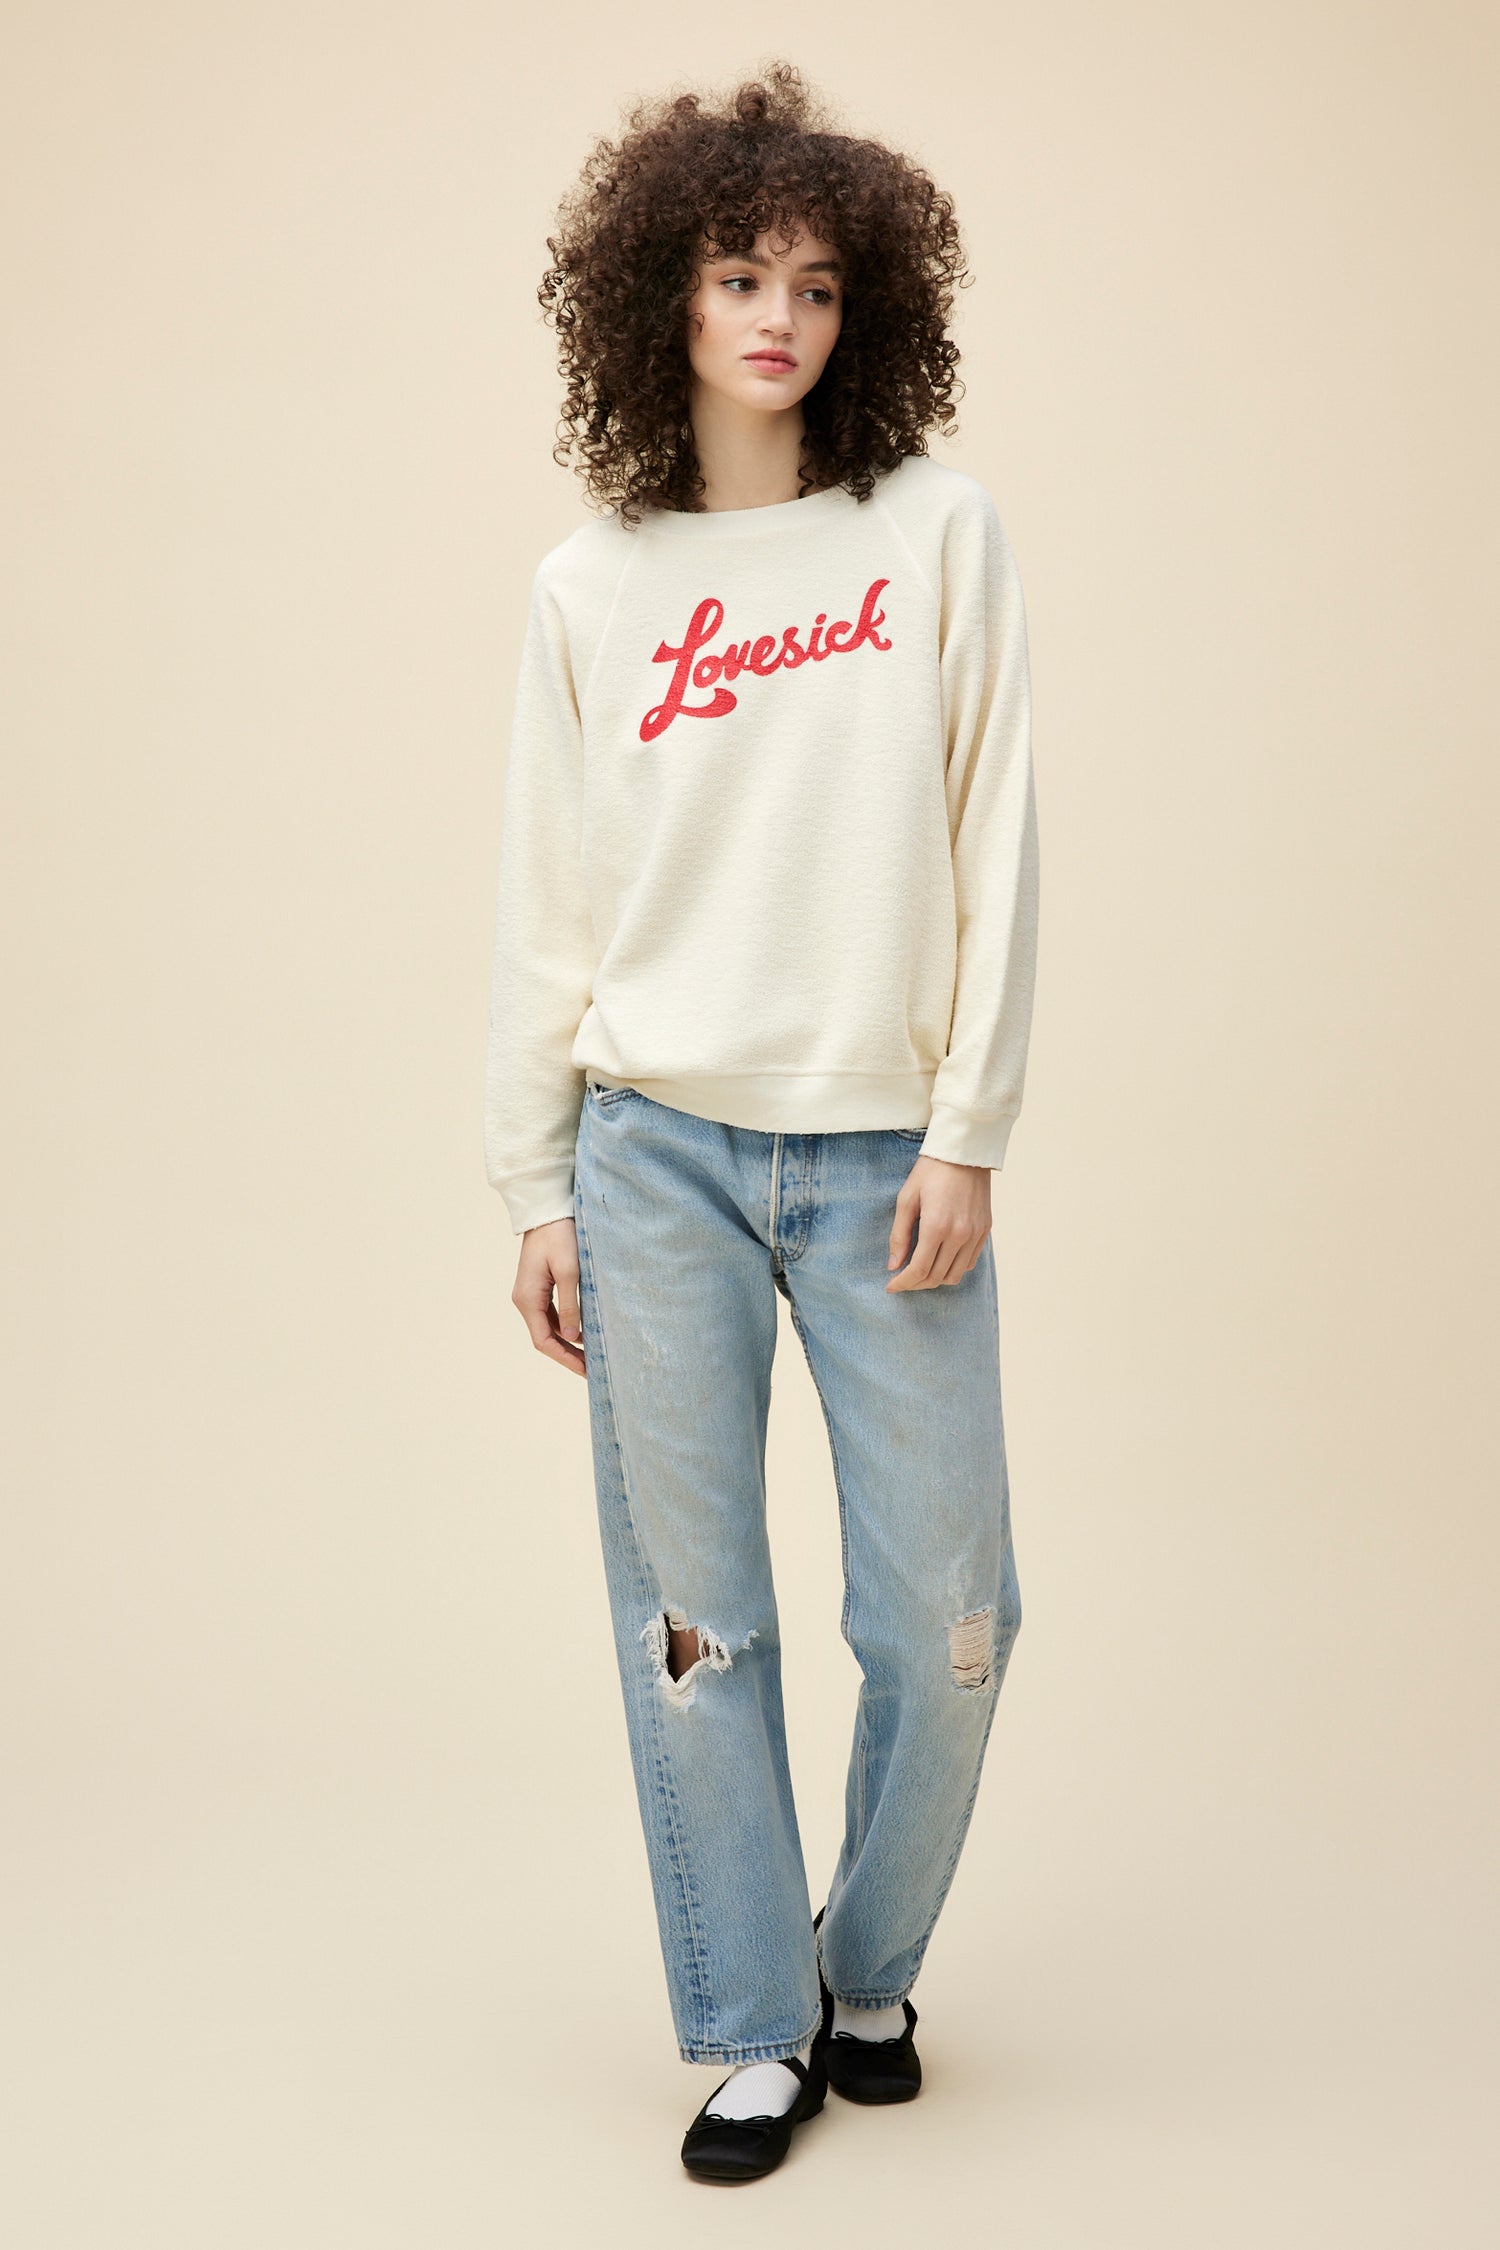 A curly-haired model wearing a reverse brushed fleece sweatshirt stamped with 'lovesick' red script on the front.